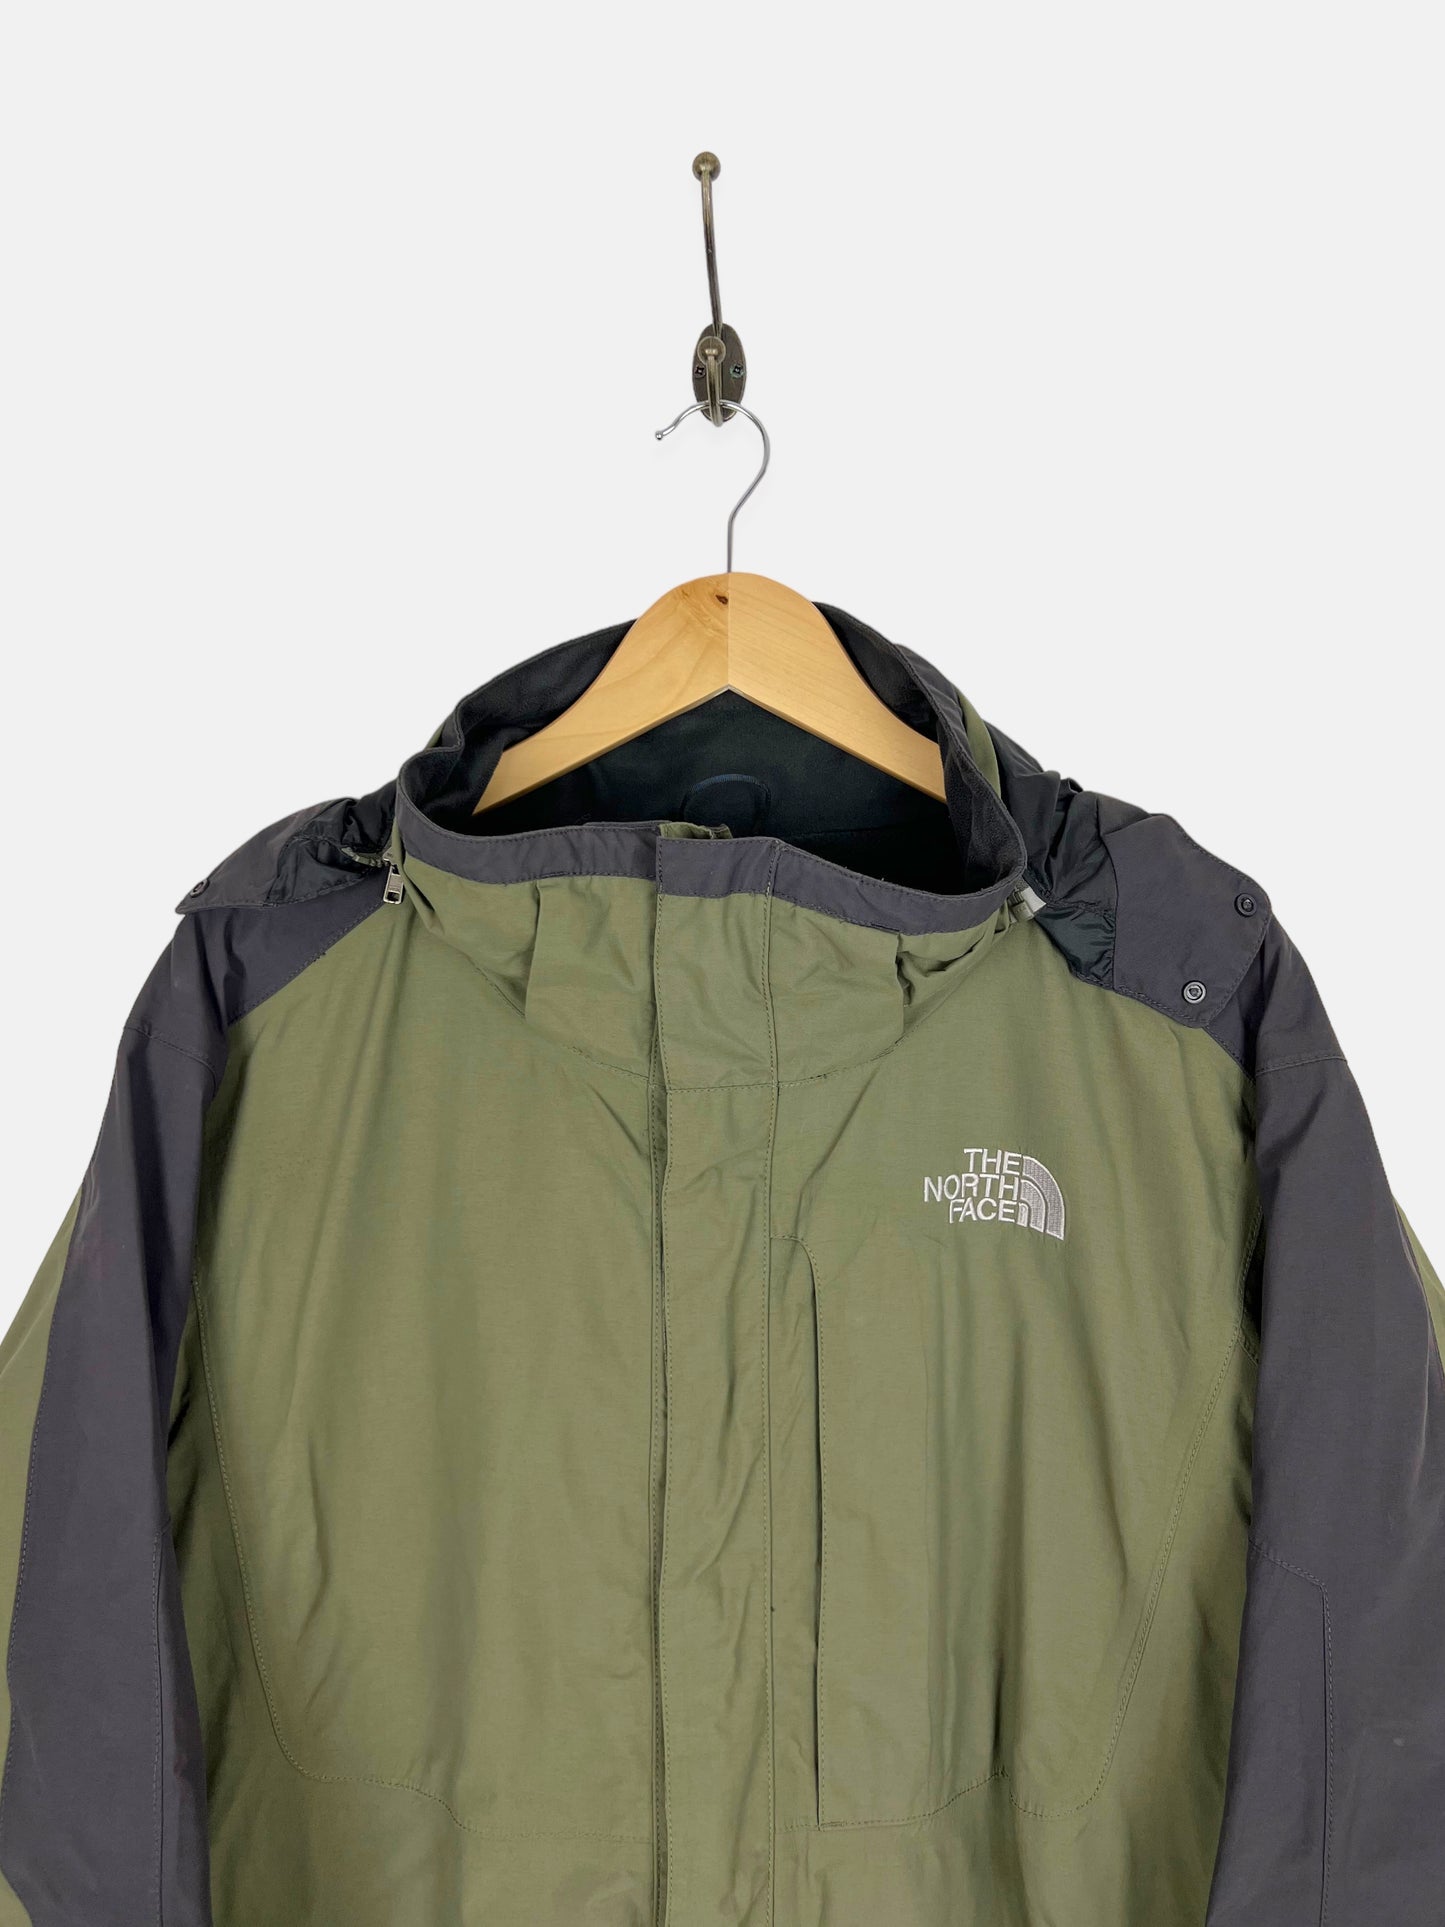 90's The North Face Gore-Tex Embroidered Vintage Jacket with Hood Size XL